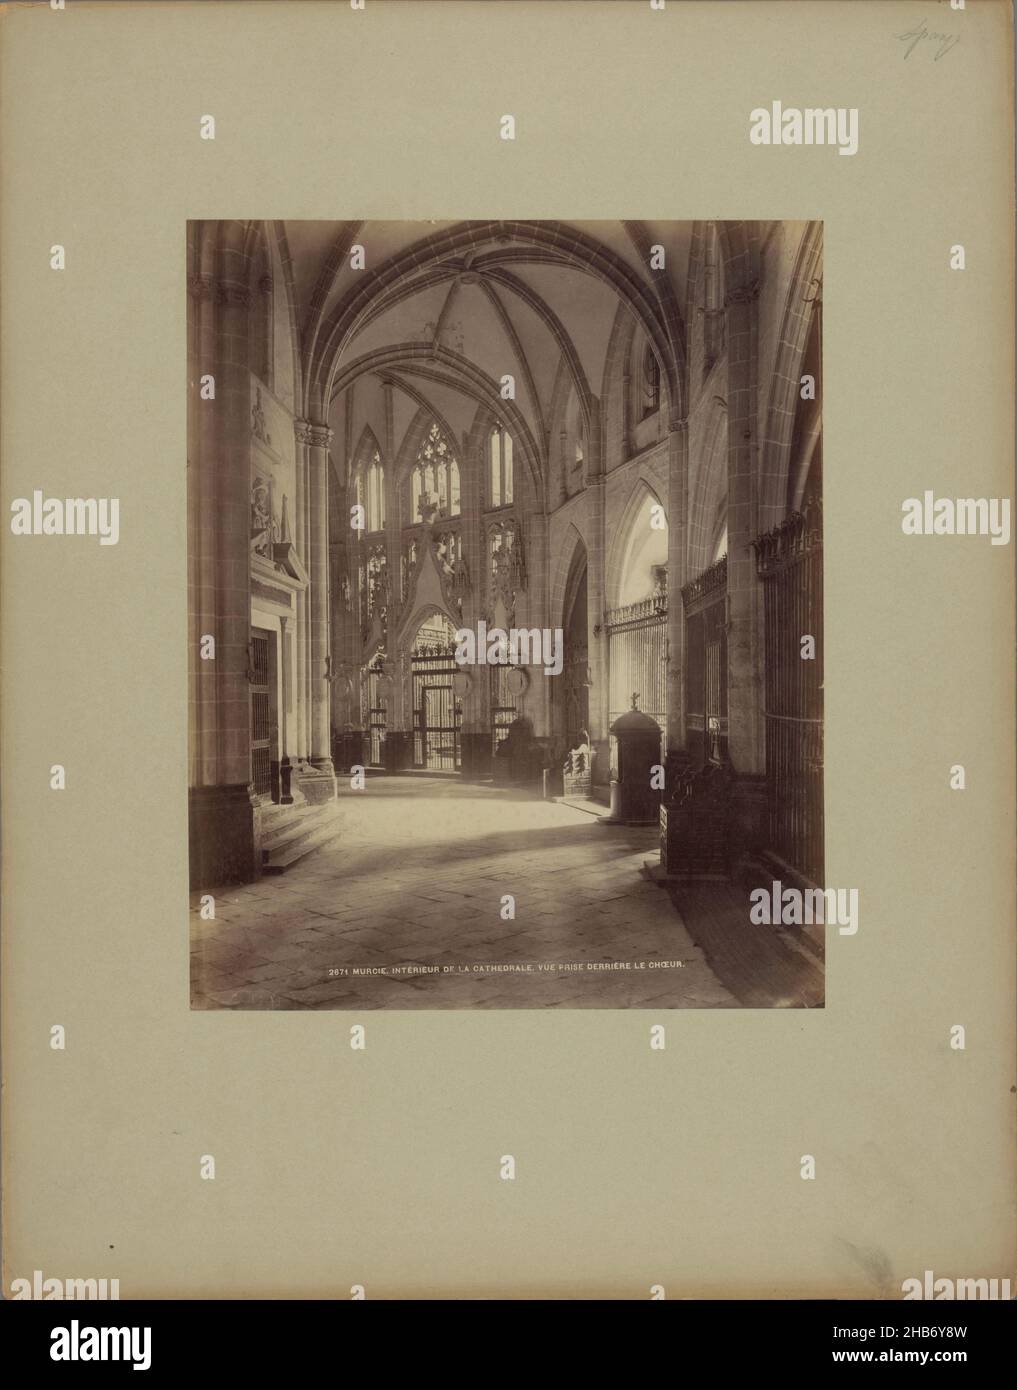 Vault with ribs coming together in a star shape in the cathedral at Burgos, Burgos. - Int. de la Cathédrale [(...), anonymous, Kathedraal van Burgos, c. 1875 - c. 1900, cardboard, albumen print, height 285 mm × width 225 mm Stock Photo